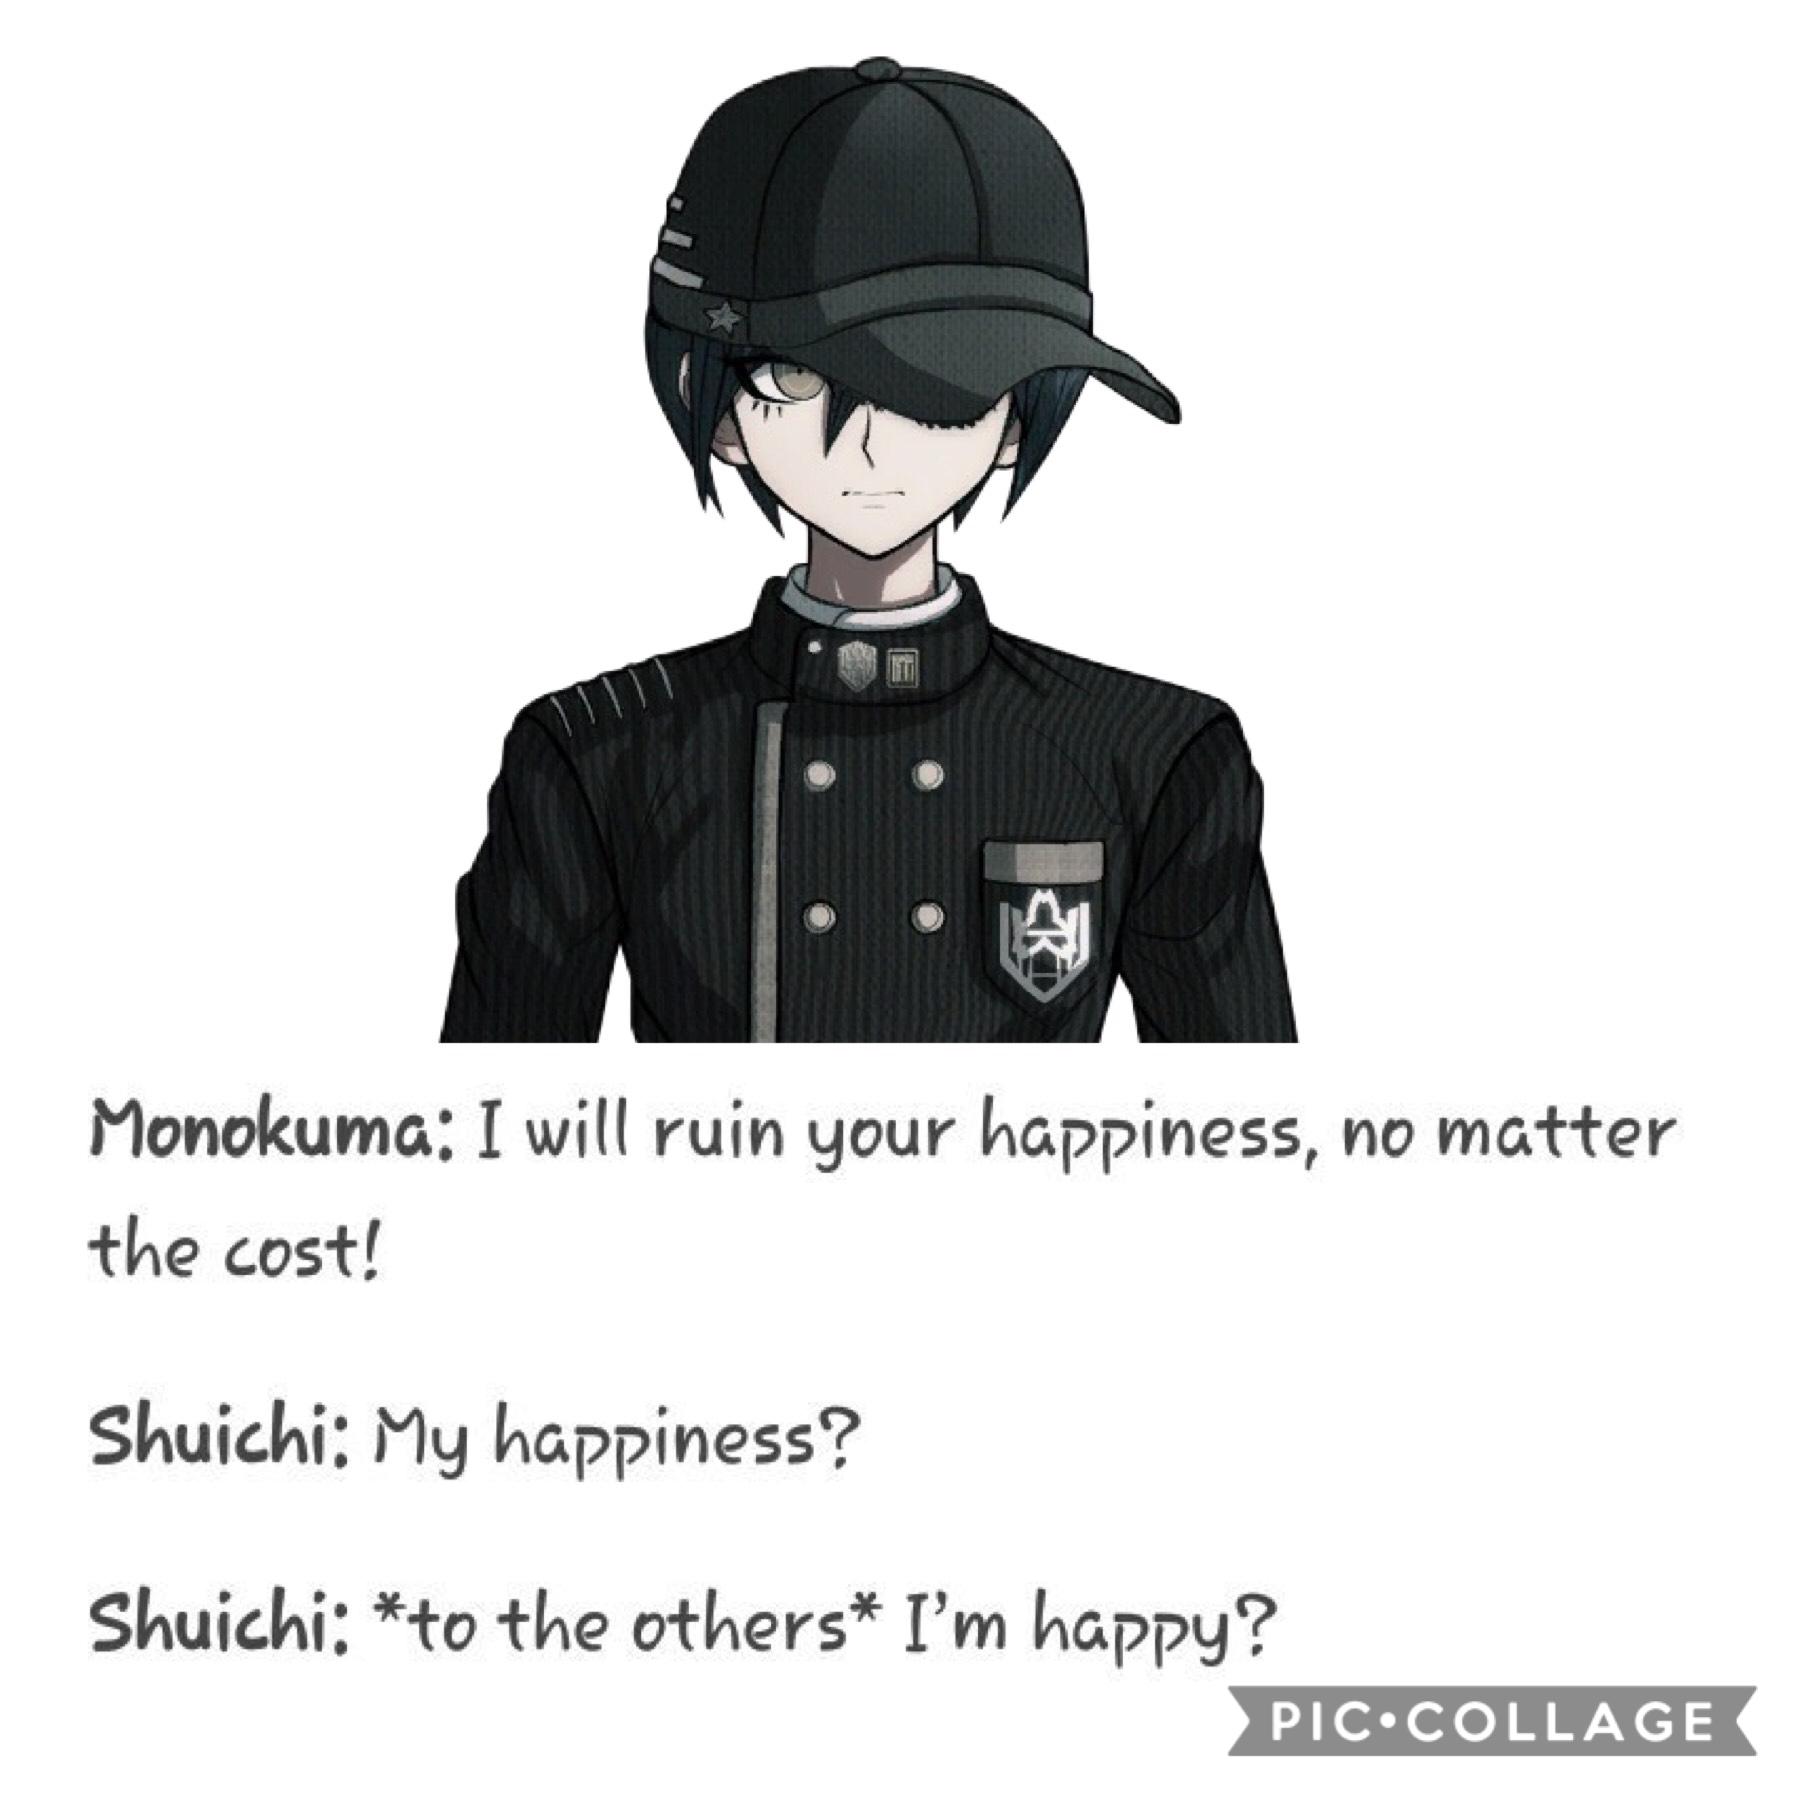 God Shuichi why are you so freaking emo...I mean just because everyone you loved died in this killing game doesn’t mean you can’t live a little....